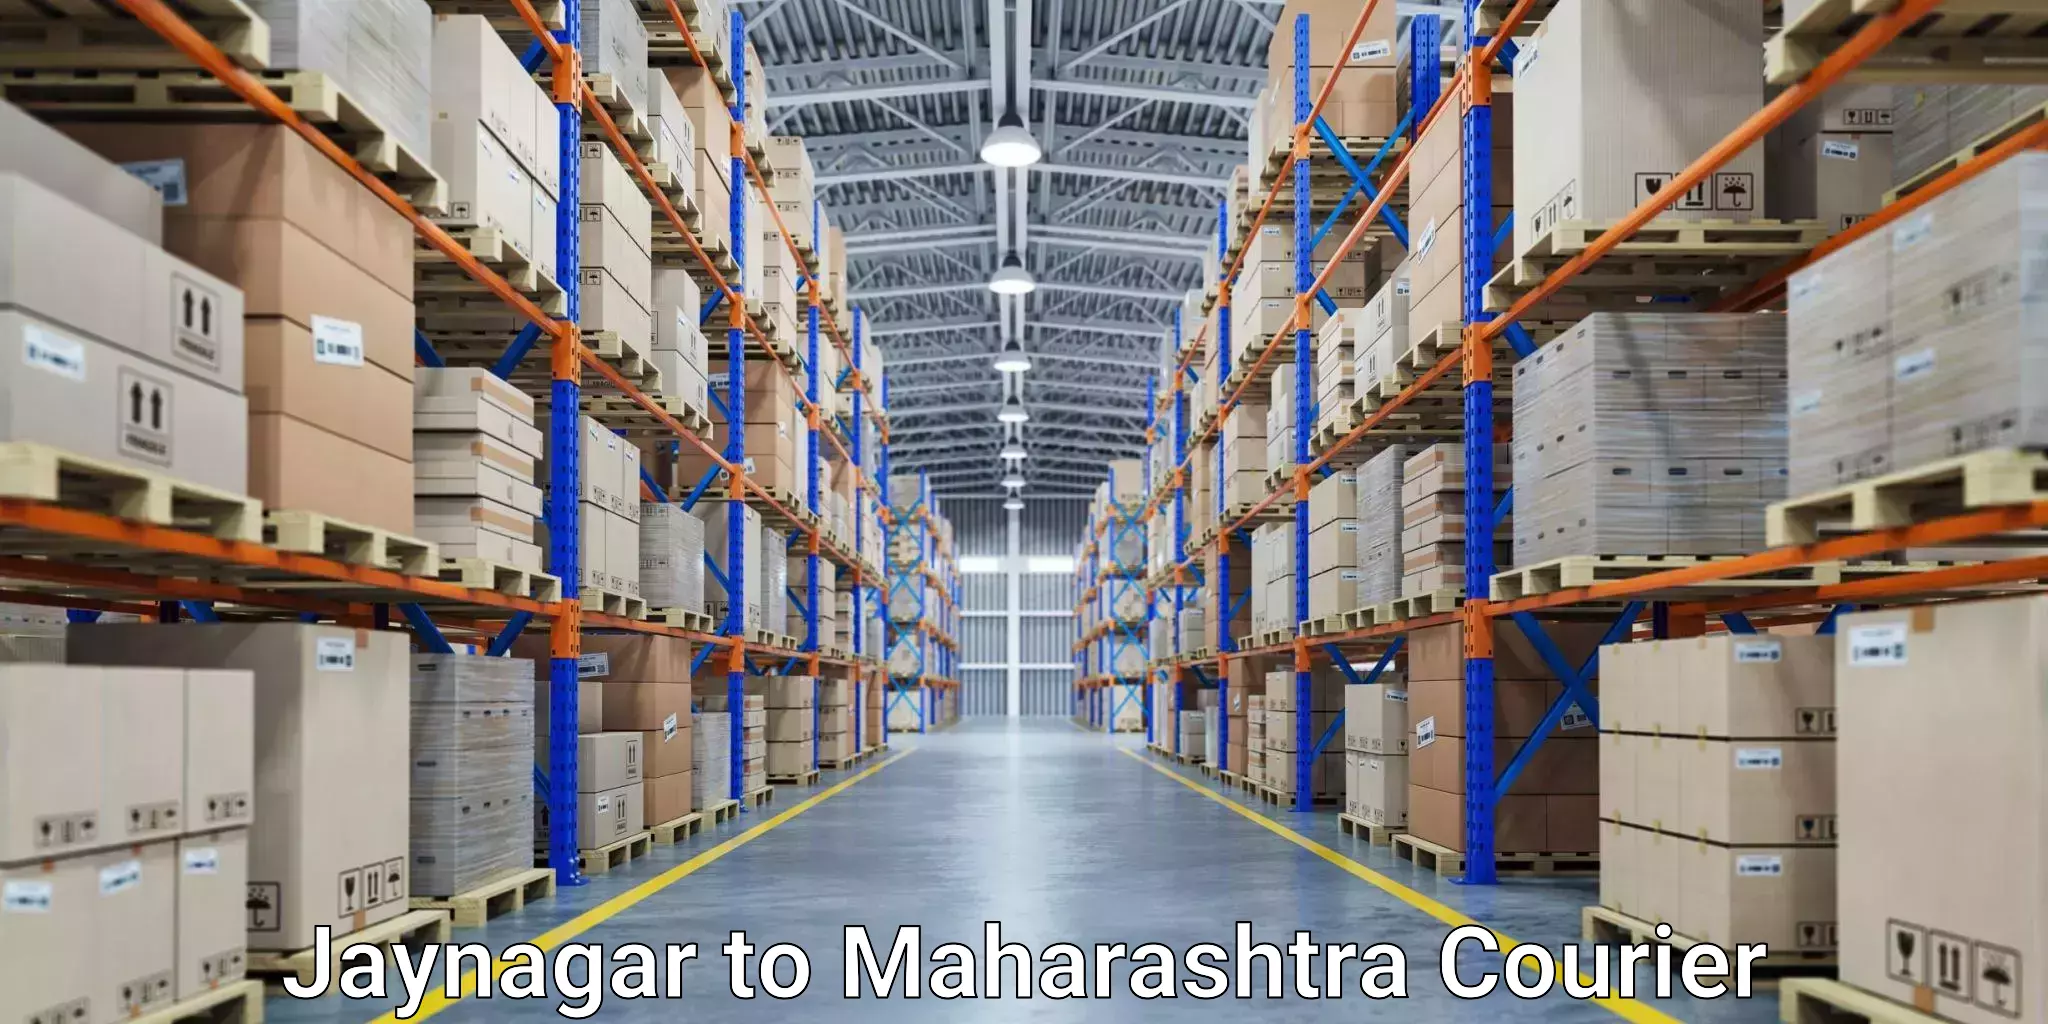 State-of-the-art courier technology Jaynagar to Mahabaleshwar